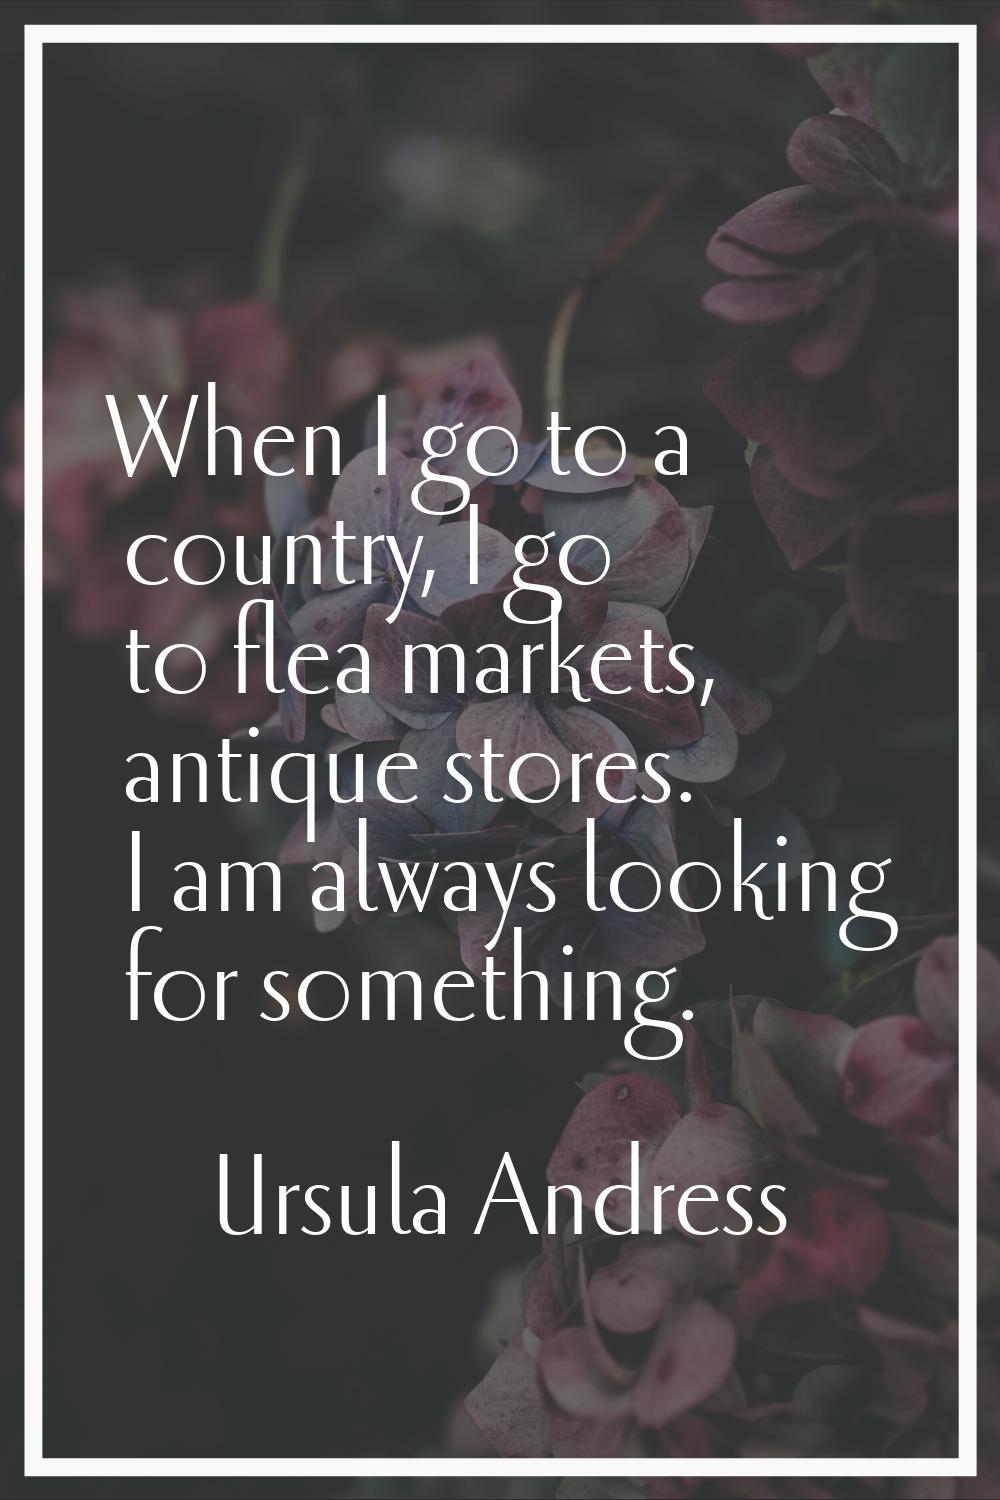 When I go to a country, I go to flea markets, antique stores. I am always looking for something.